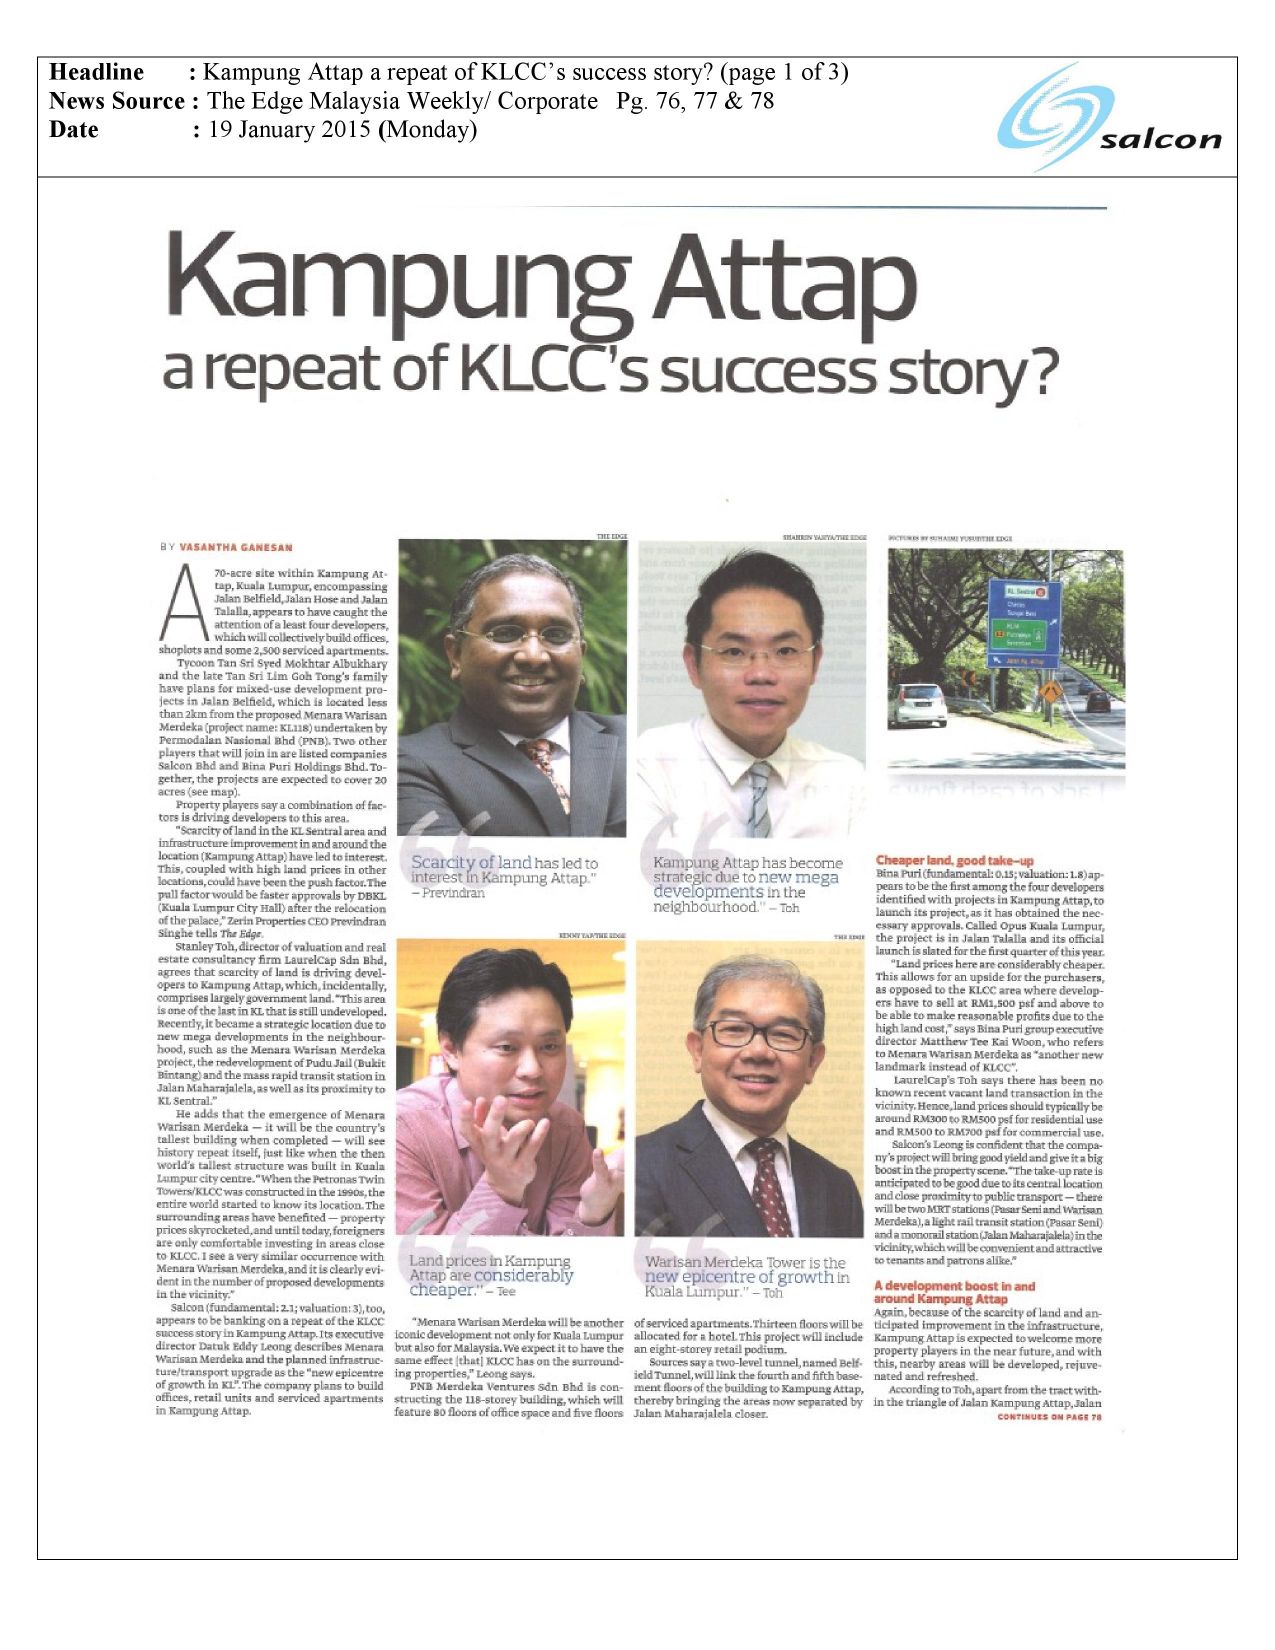 Kampung Attap a repeat of KLCC’s success story? (Page 1 of 3)